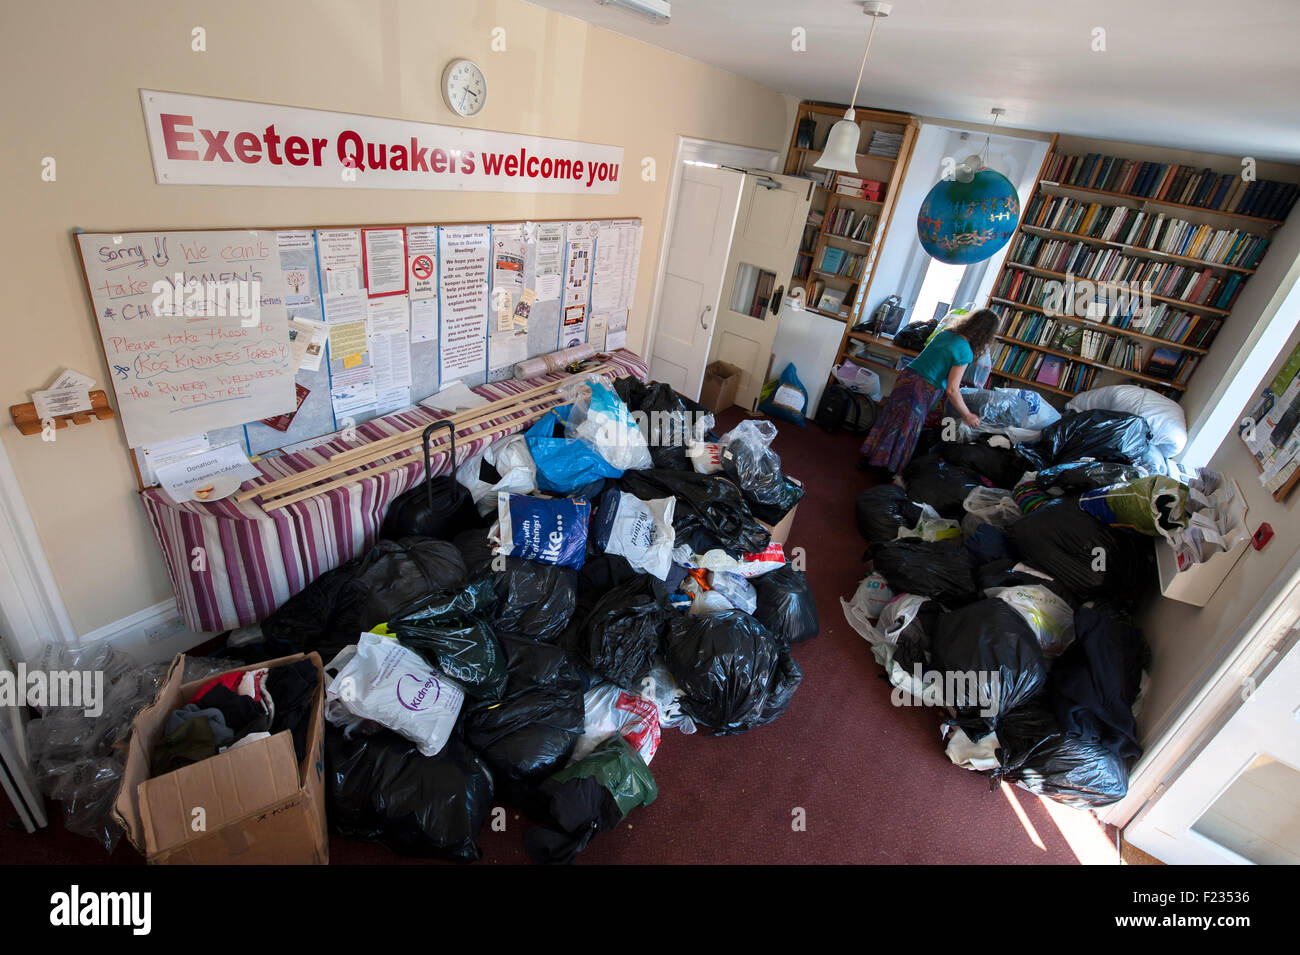 Exeter, UK. 10th Sep, 2015. The entrance hall of the Quaker Meeting House is filled with donated clothes during the Exeter Calais Solidarity collection for refugees living in 'The Jungle' refguee camp in Calais Credit:  Clive Chilvers/Alamy Live News Stock Photo